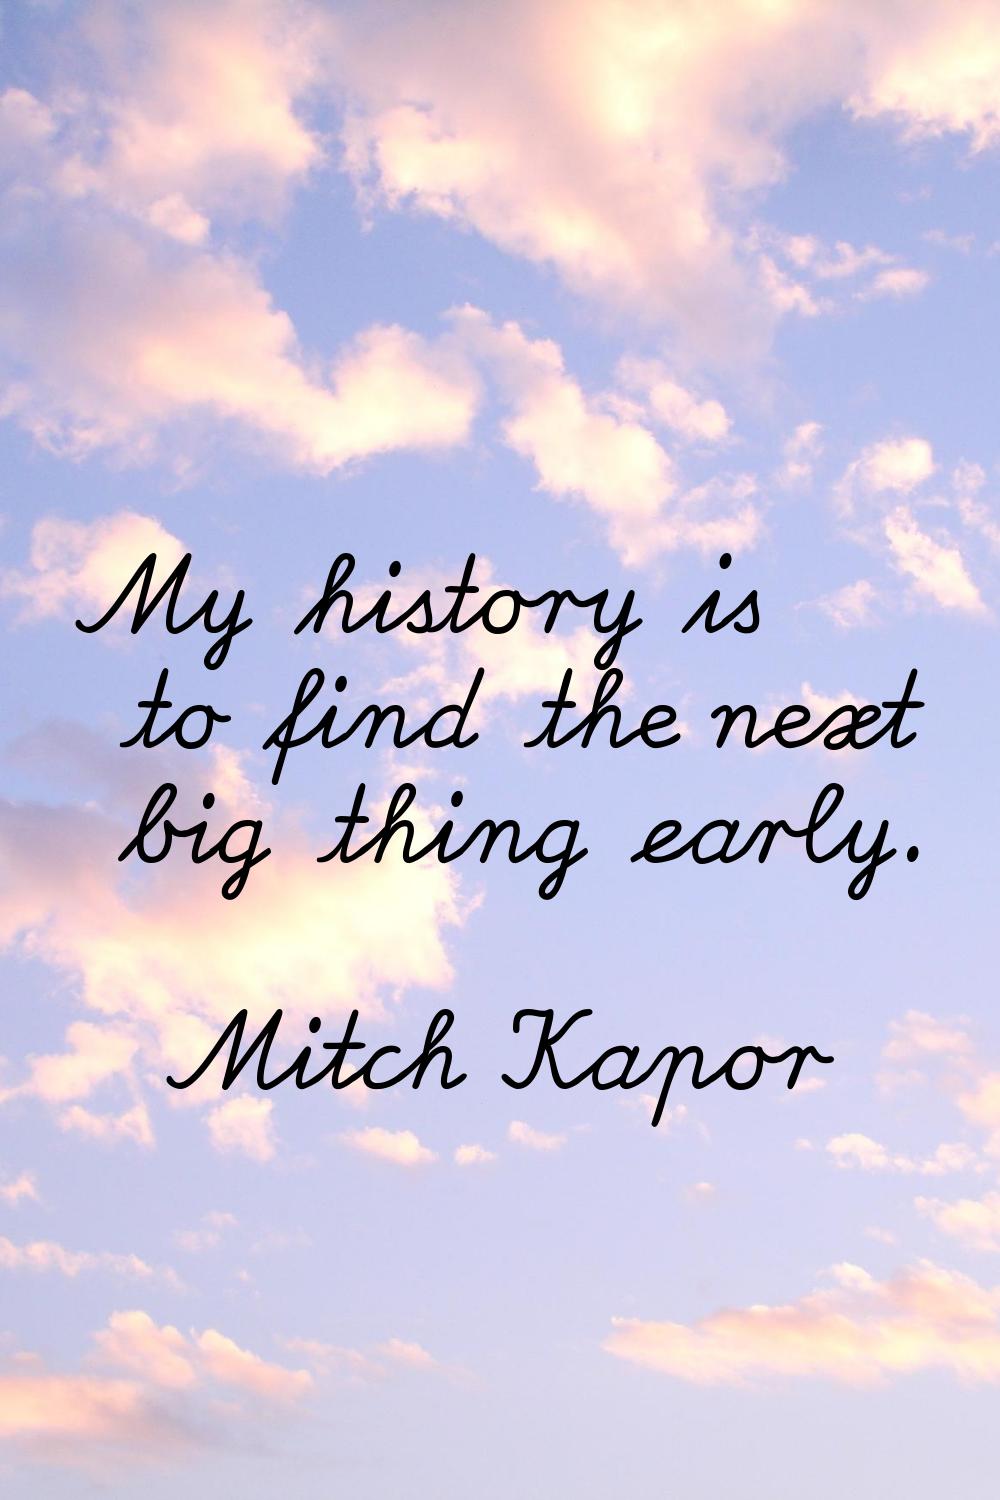 My history is to find the next big thing early.